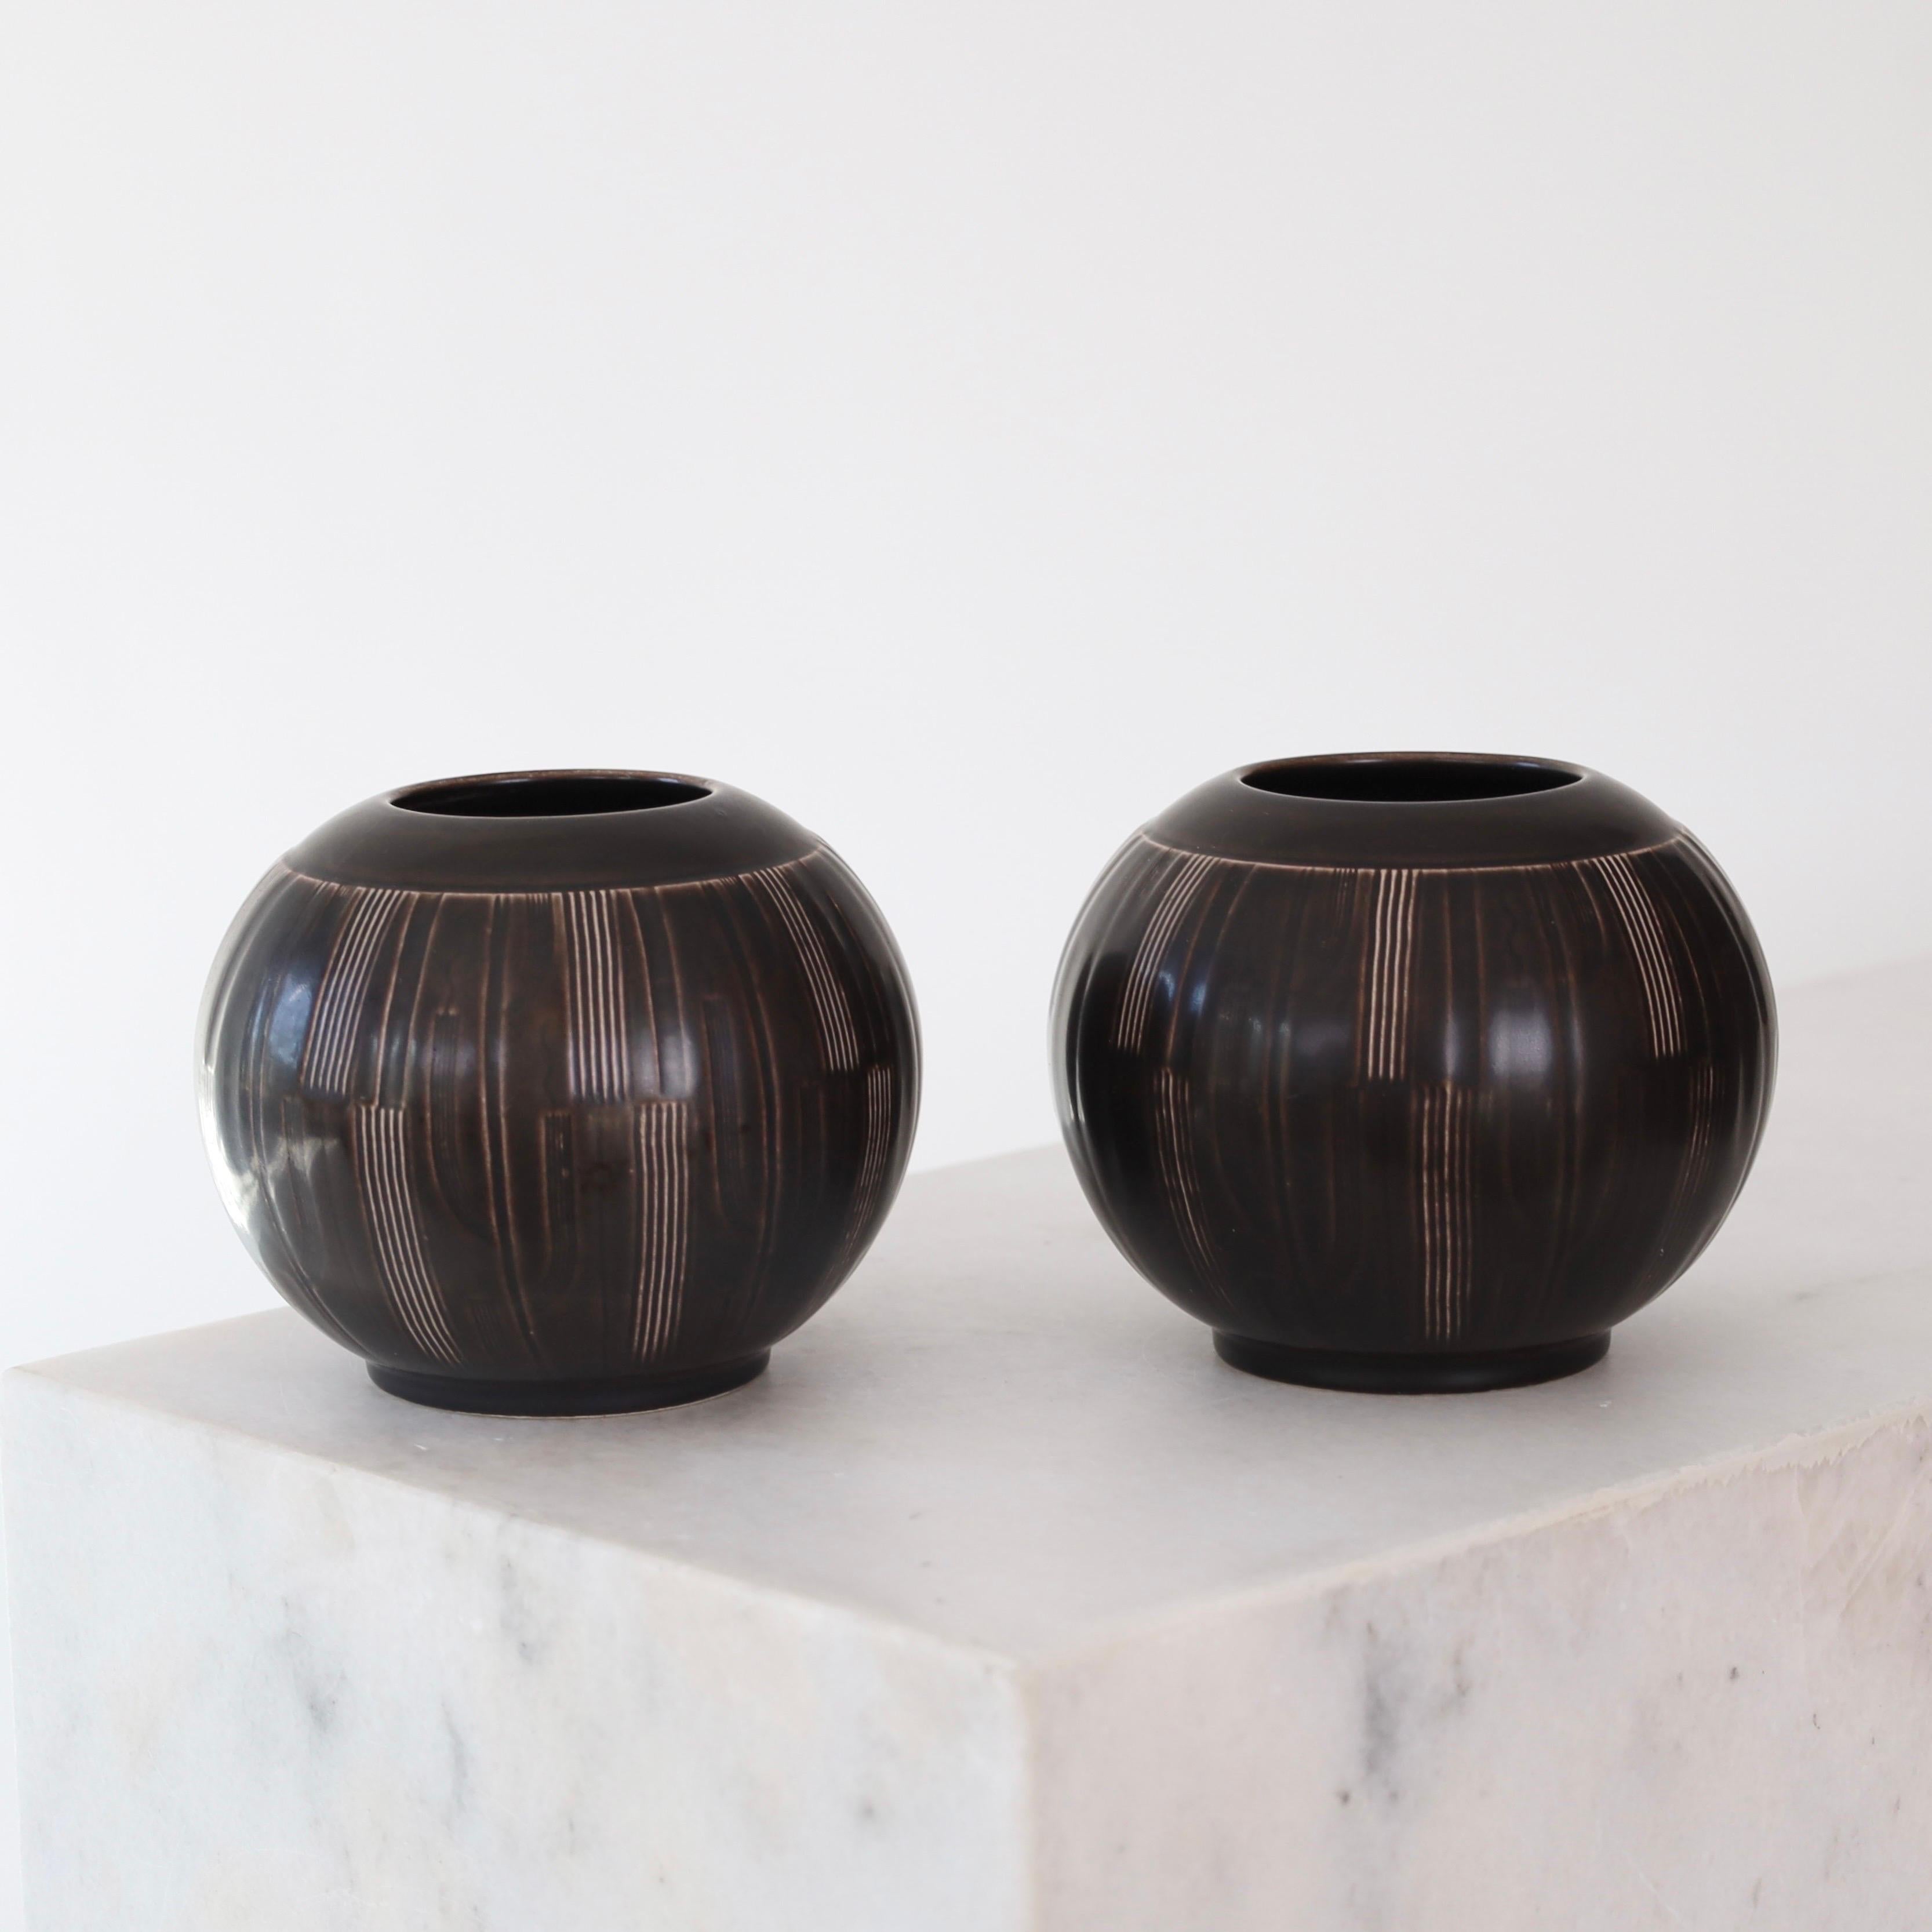 Set of ceramic vases designed ny Nils Thorsson in the 1950s for Alumina Denmark. A rare duo for a beautiful place.

* Set of ball-shaped ceramic vases
* Designer: Nils Thorsson
* Style: 1567 
* Producer: Aluminia (later Royal Copenhagen)
* Design